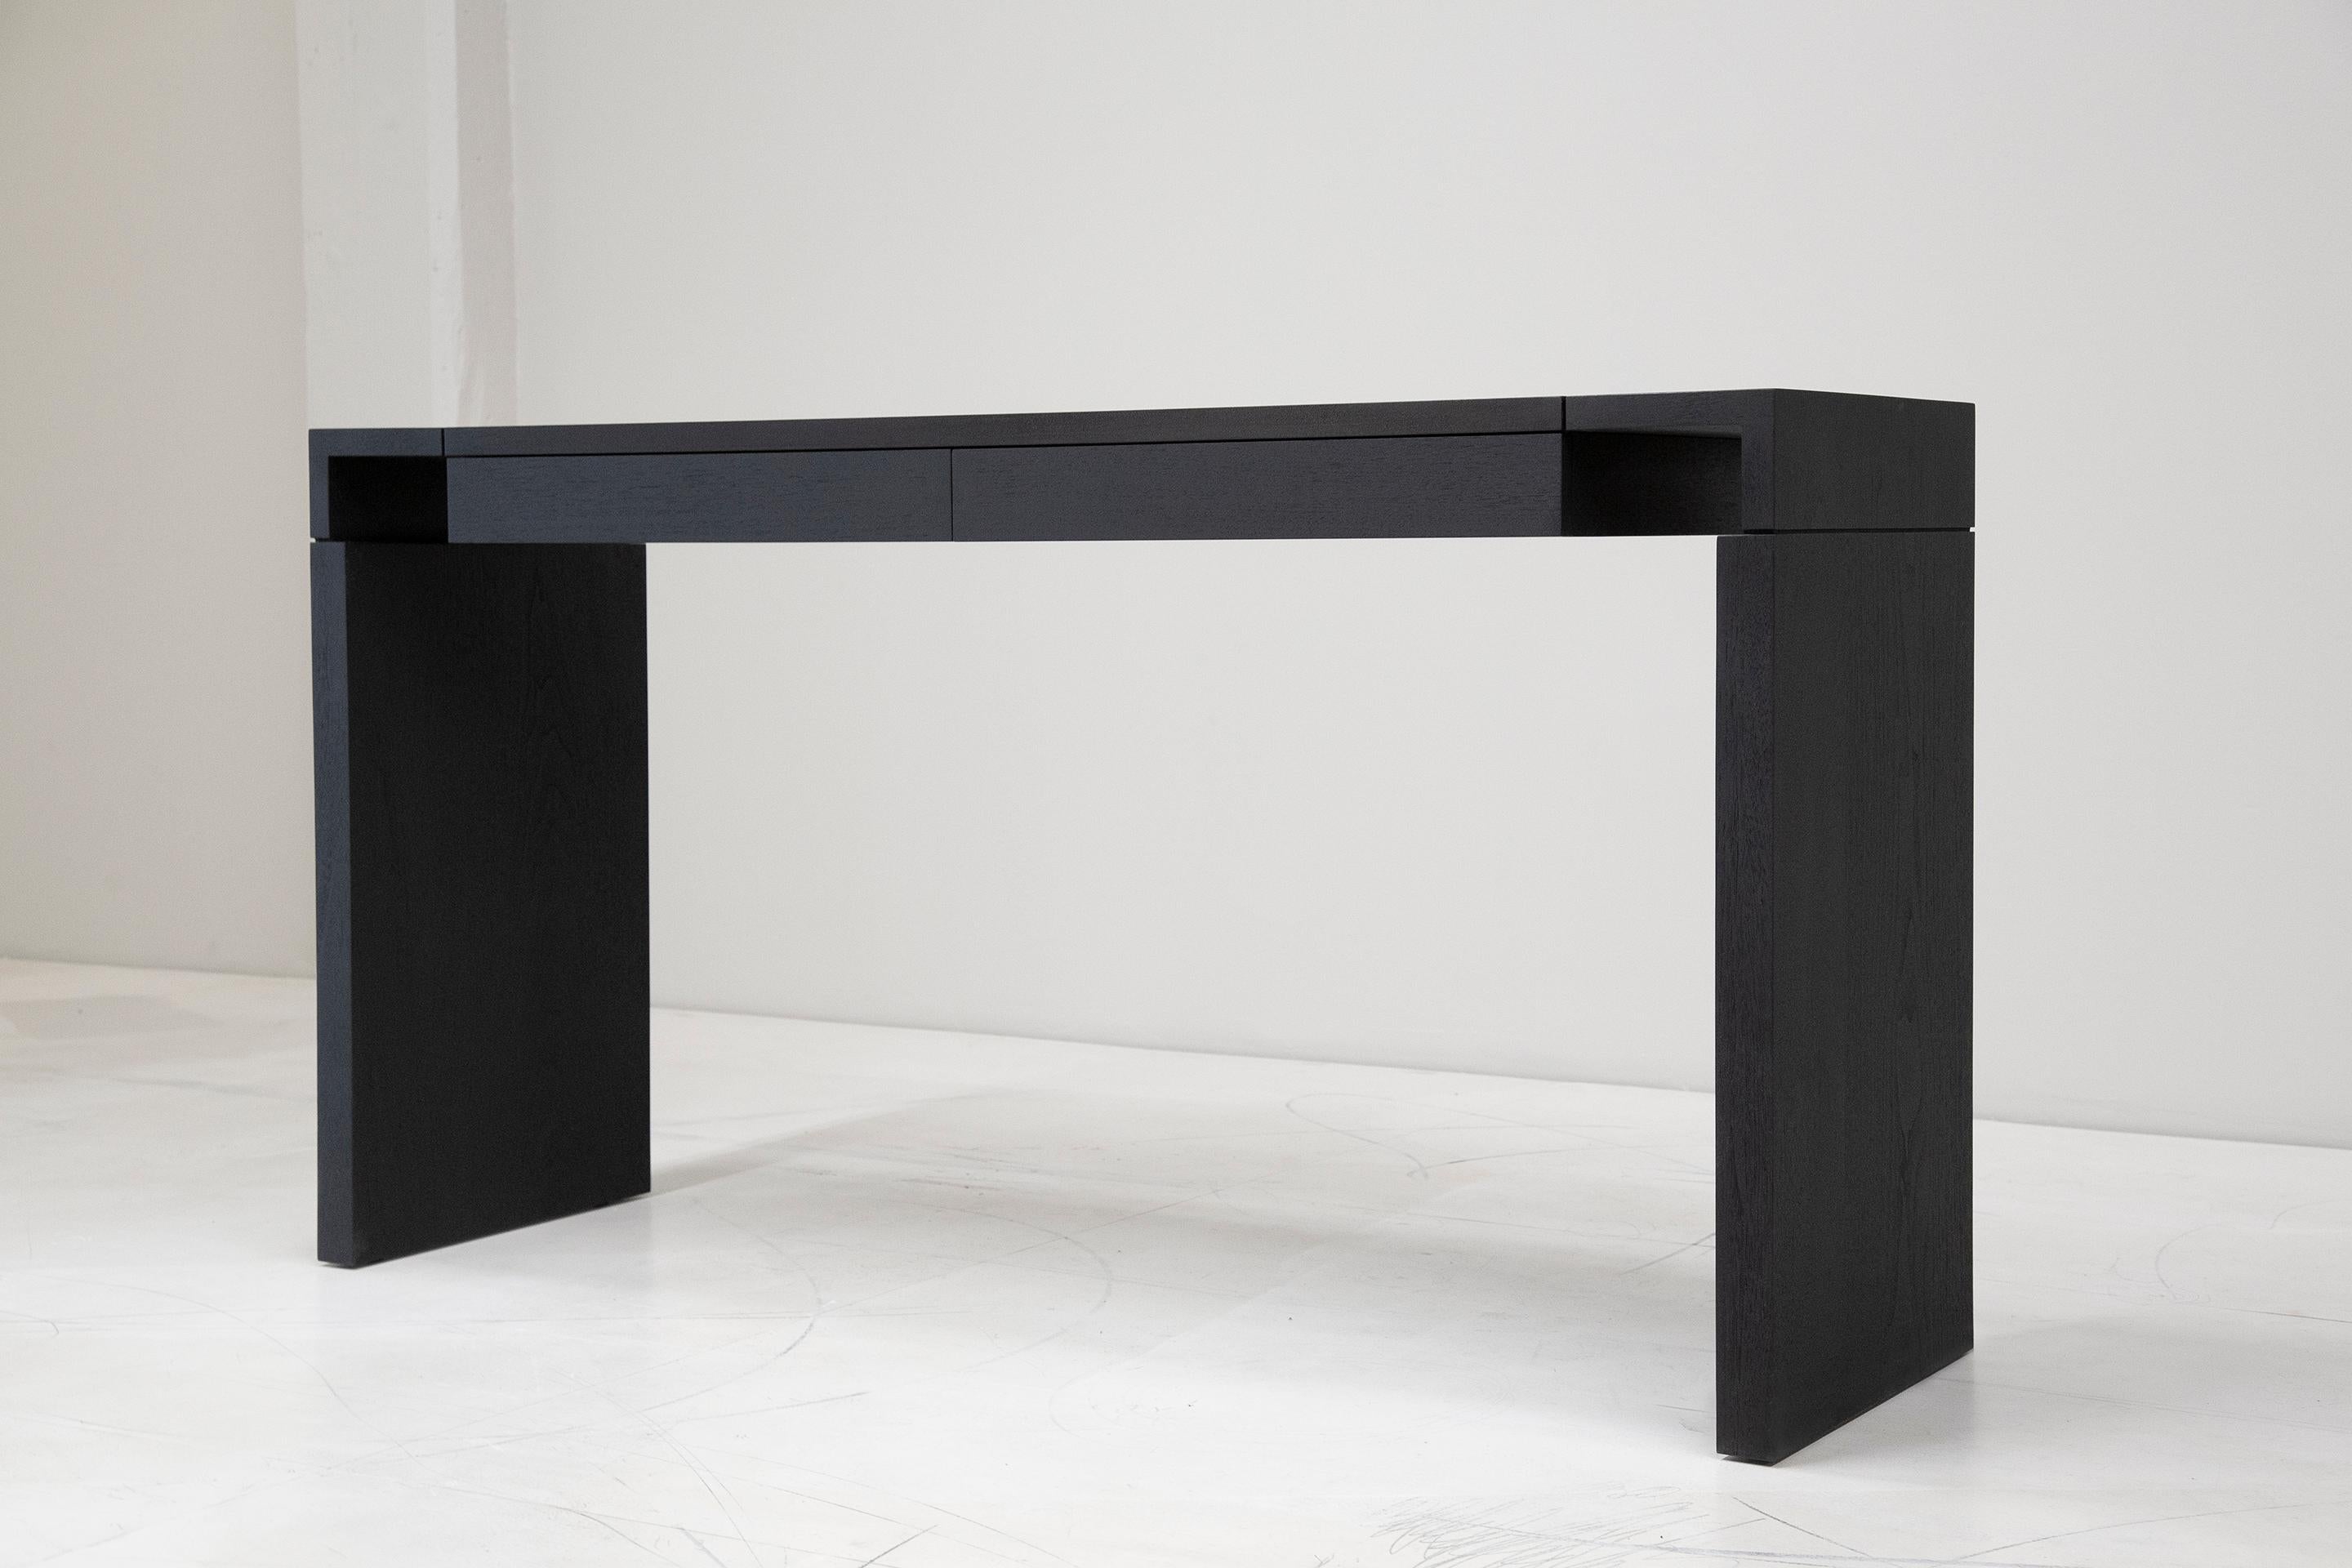 Made to order in Brooklyn, New York this customizable desk with drawer options is handmade of solid wood with meticulously cut finger joints as its unique design feature.   
Shown: 66